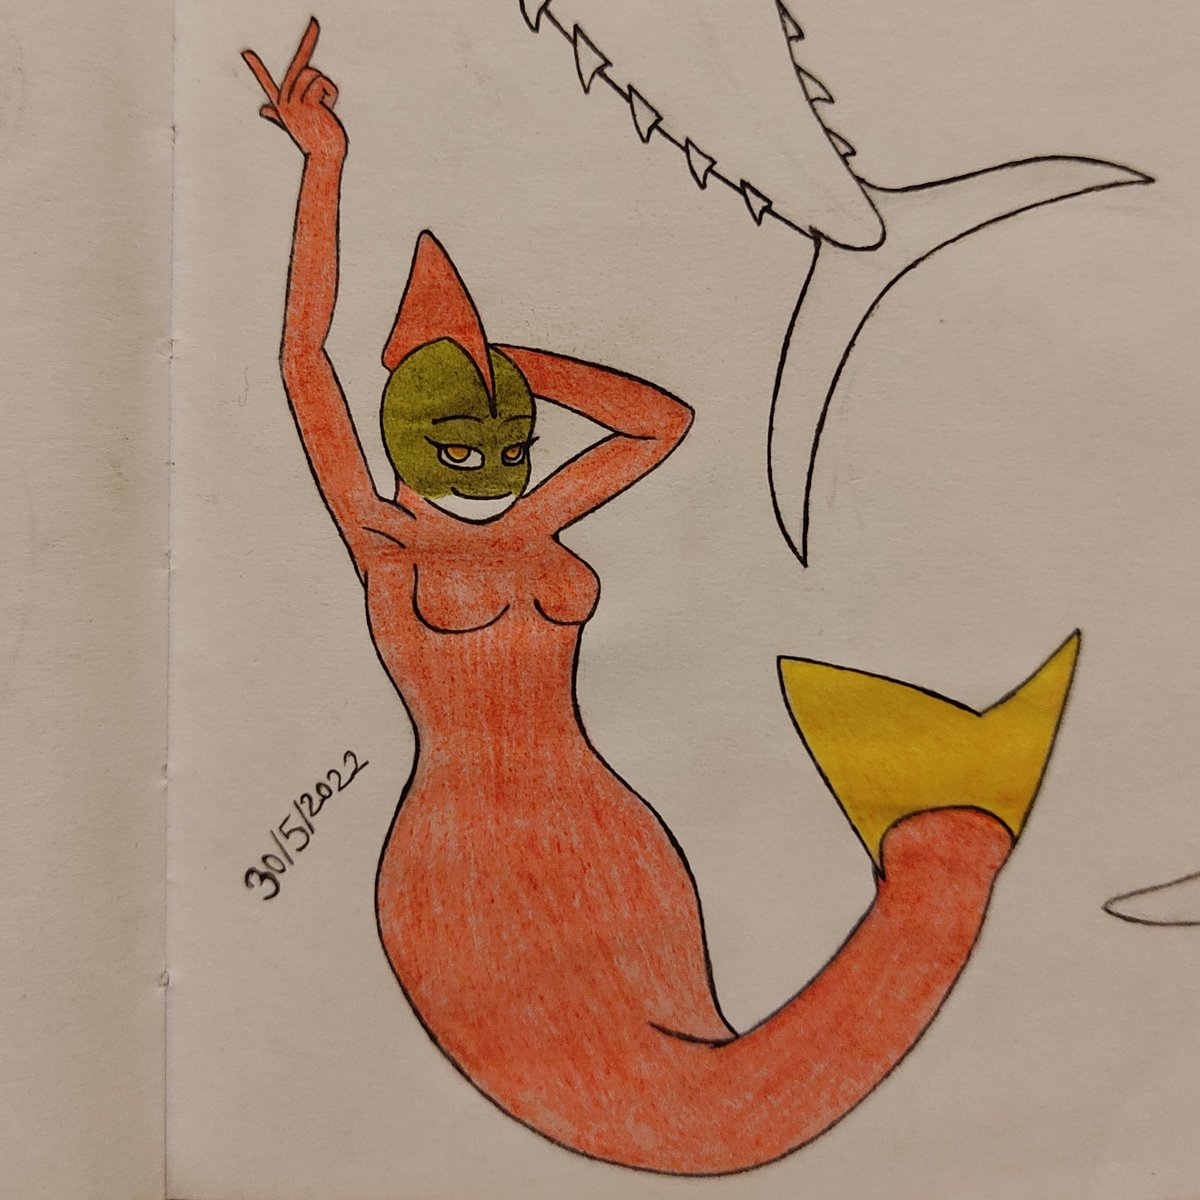 MerMay's 30th mermaid was a Sockeye Salmon!

#art #mermay #mermay2023 #mermaid #fish #sockeyesalmon #salmon #oncorhynchusnerka #colour #pencil #traditionalart #daily #artistsontwitter